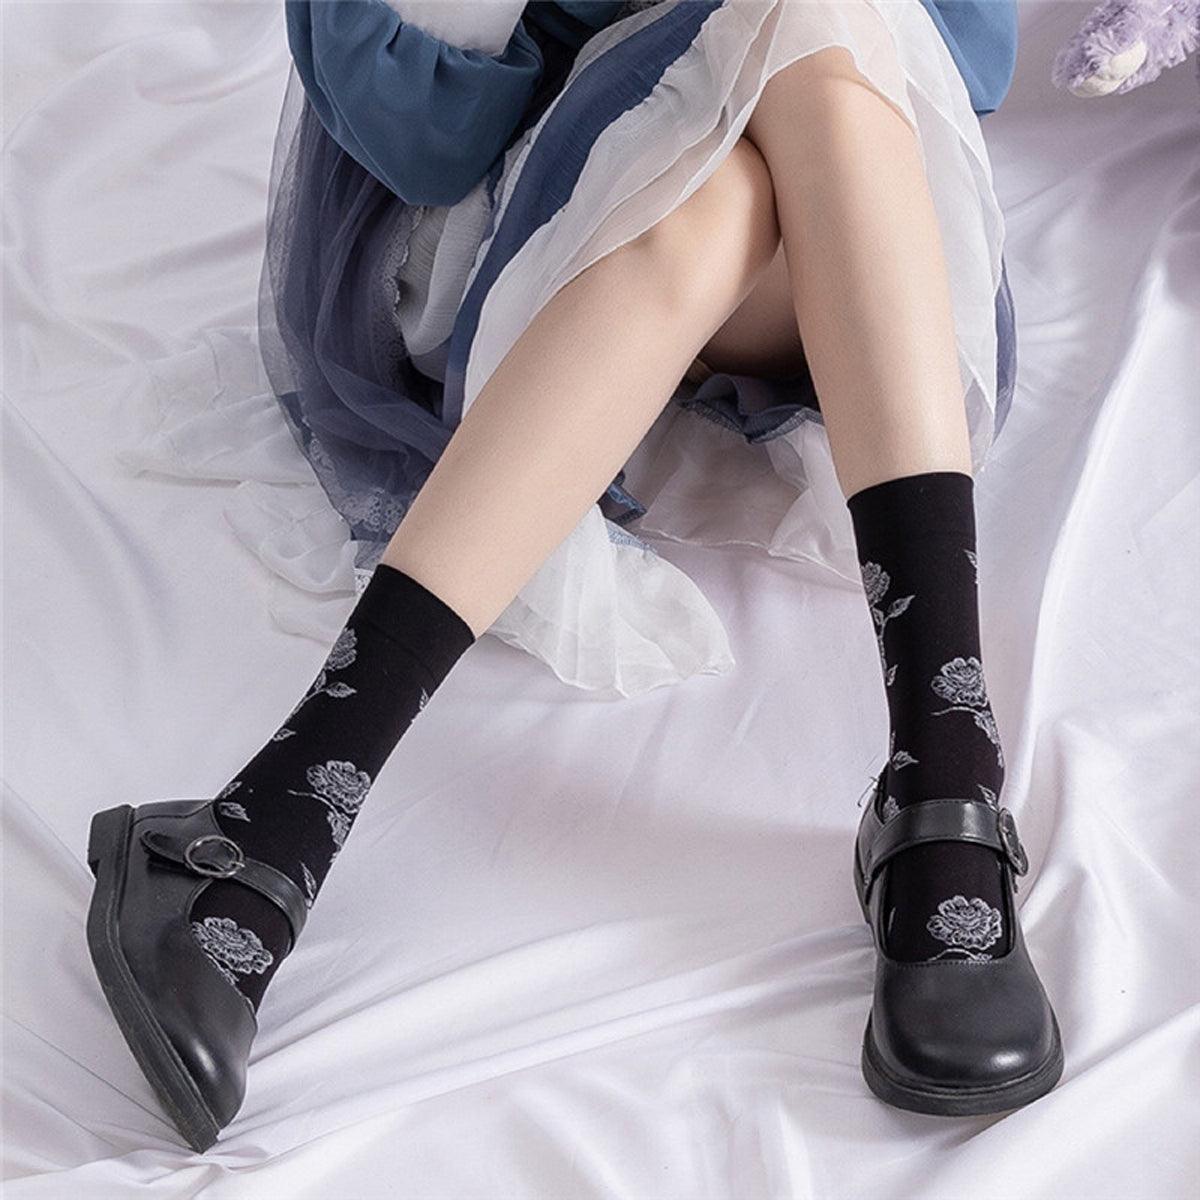 Knee Long Socks Roses Aesthetic - Aesthetic Clothes Shop